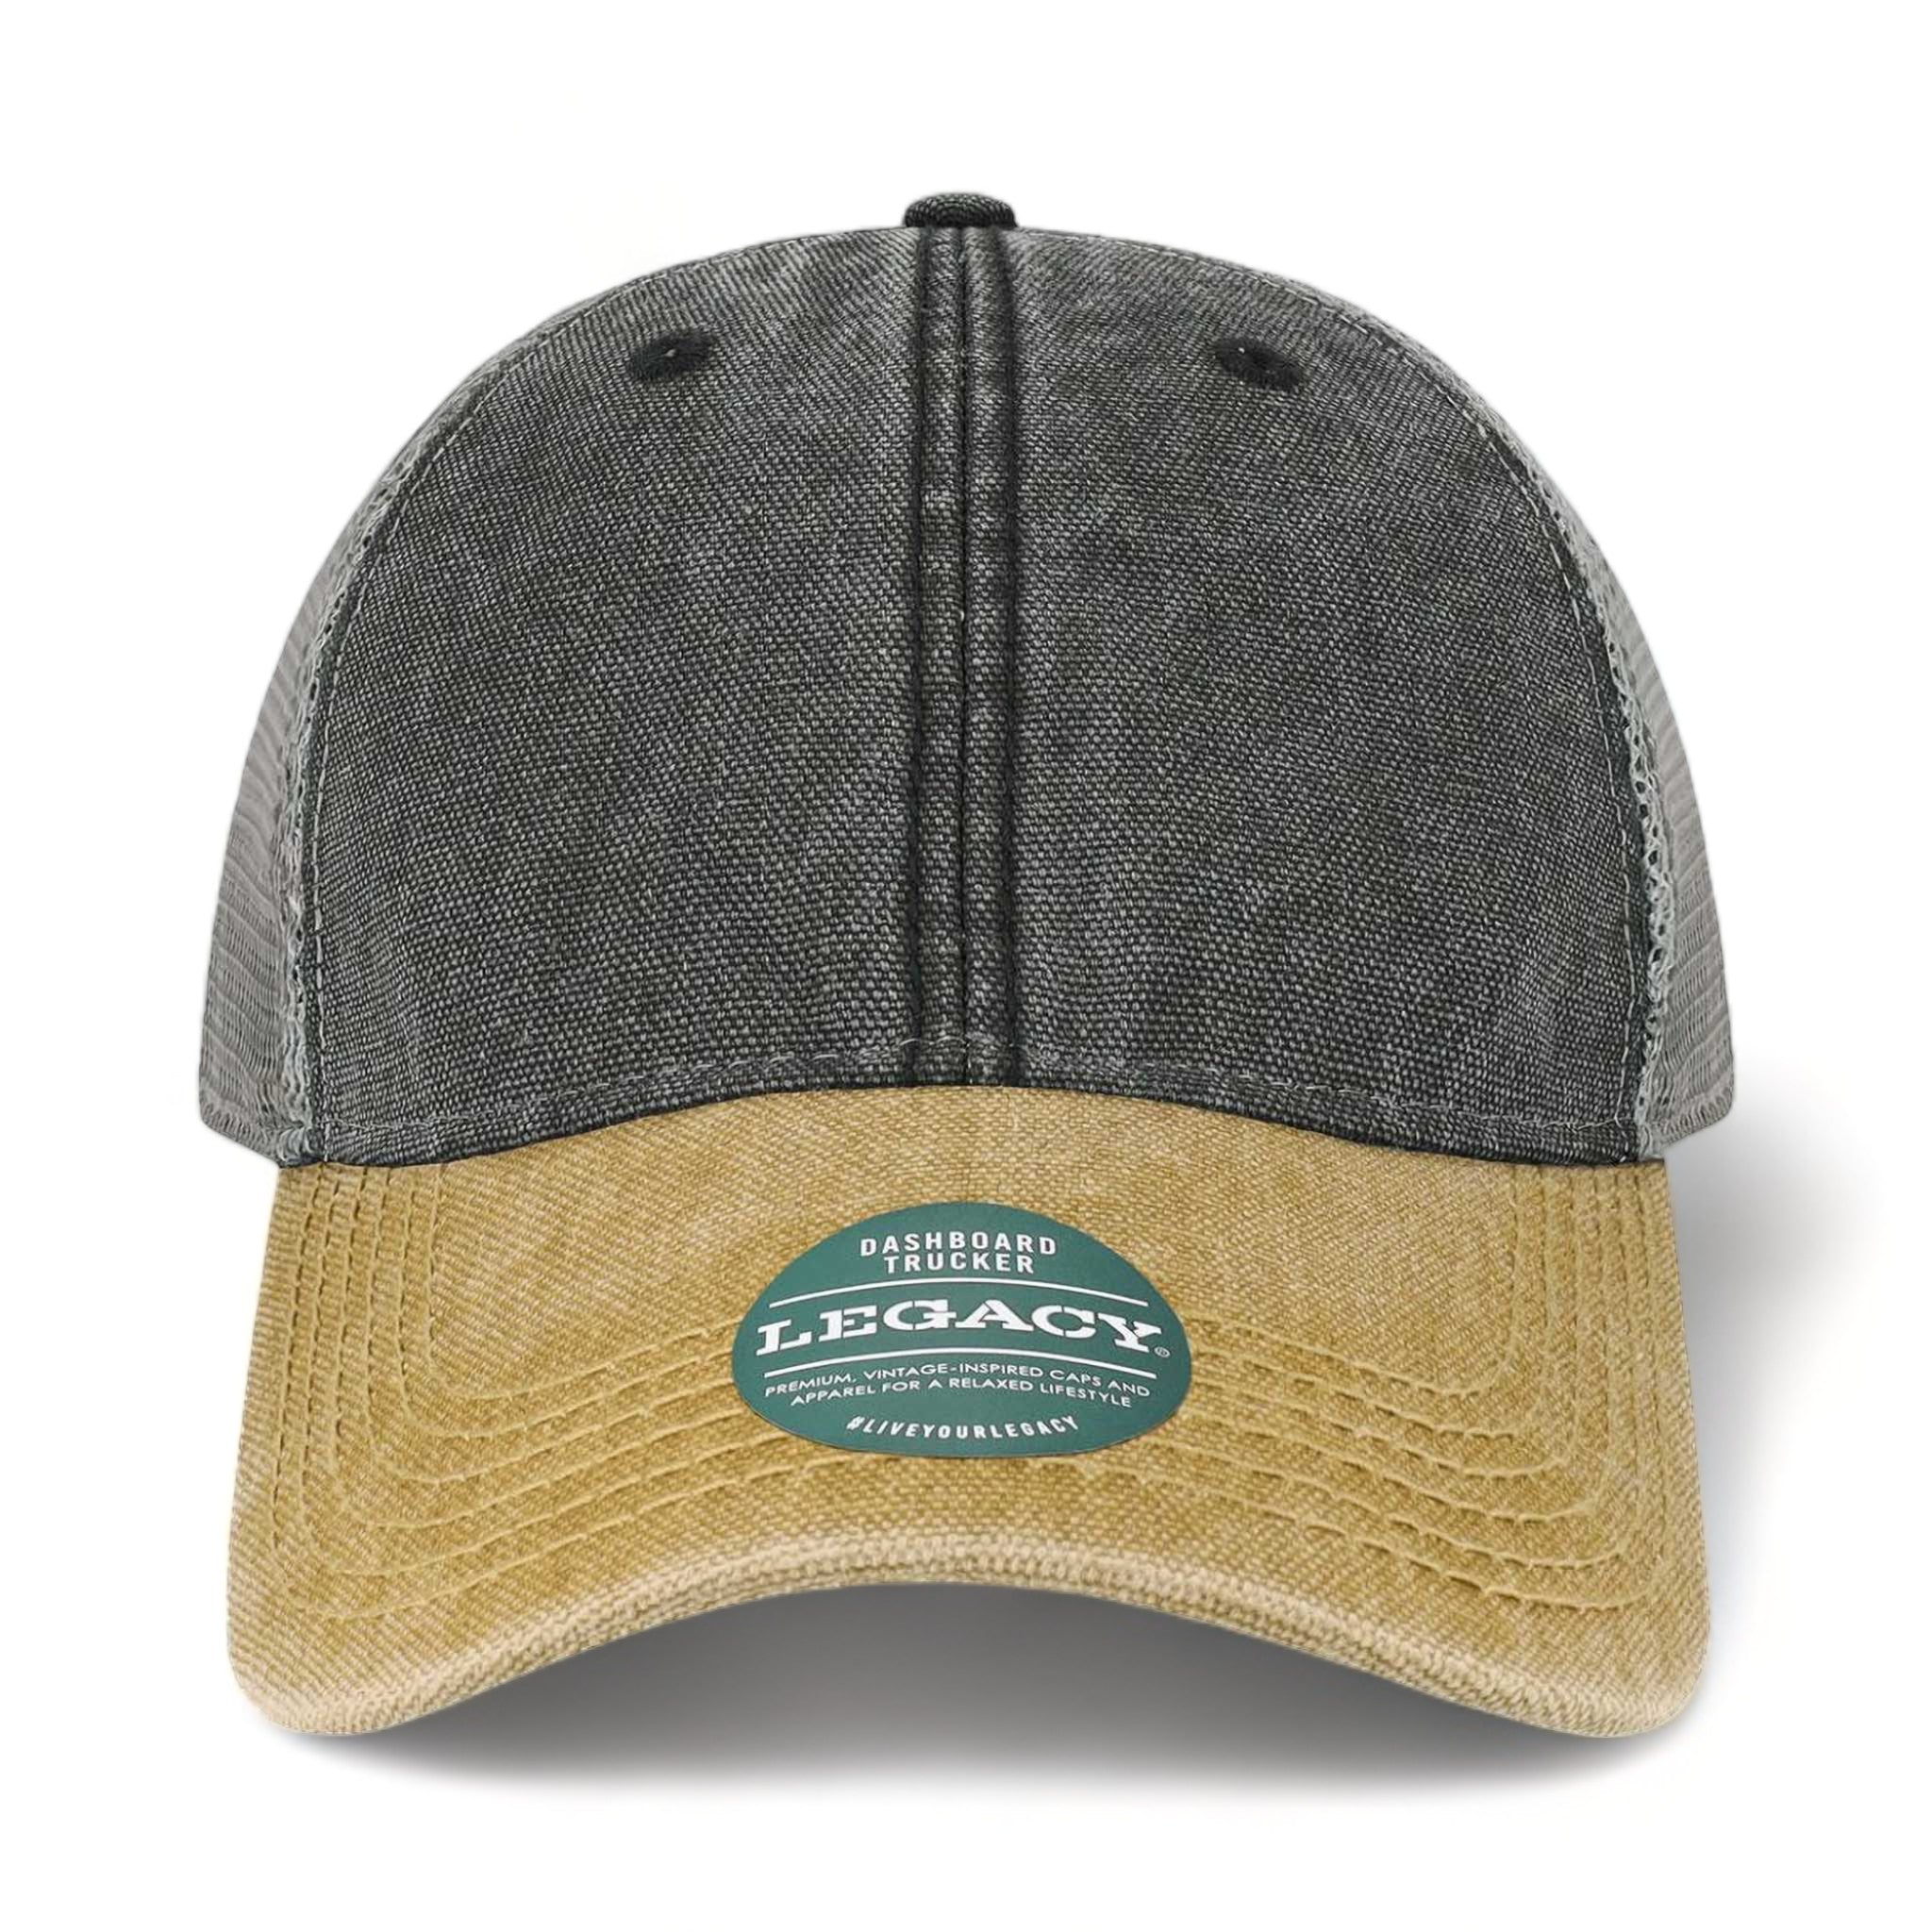 Front view of LEGACY DTA custom hat in black, camel and grey